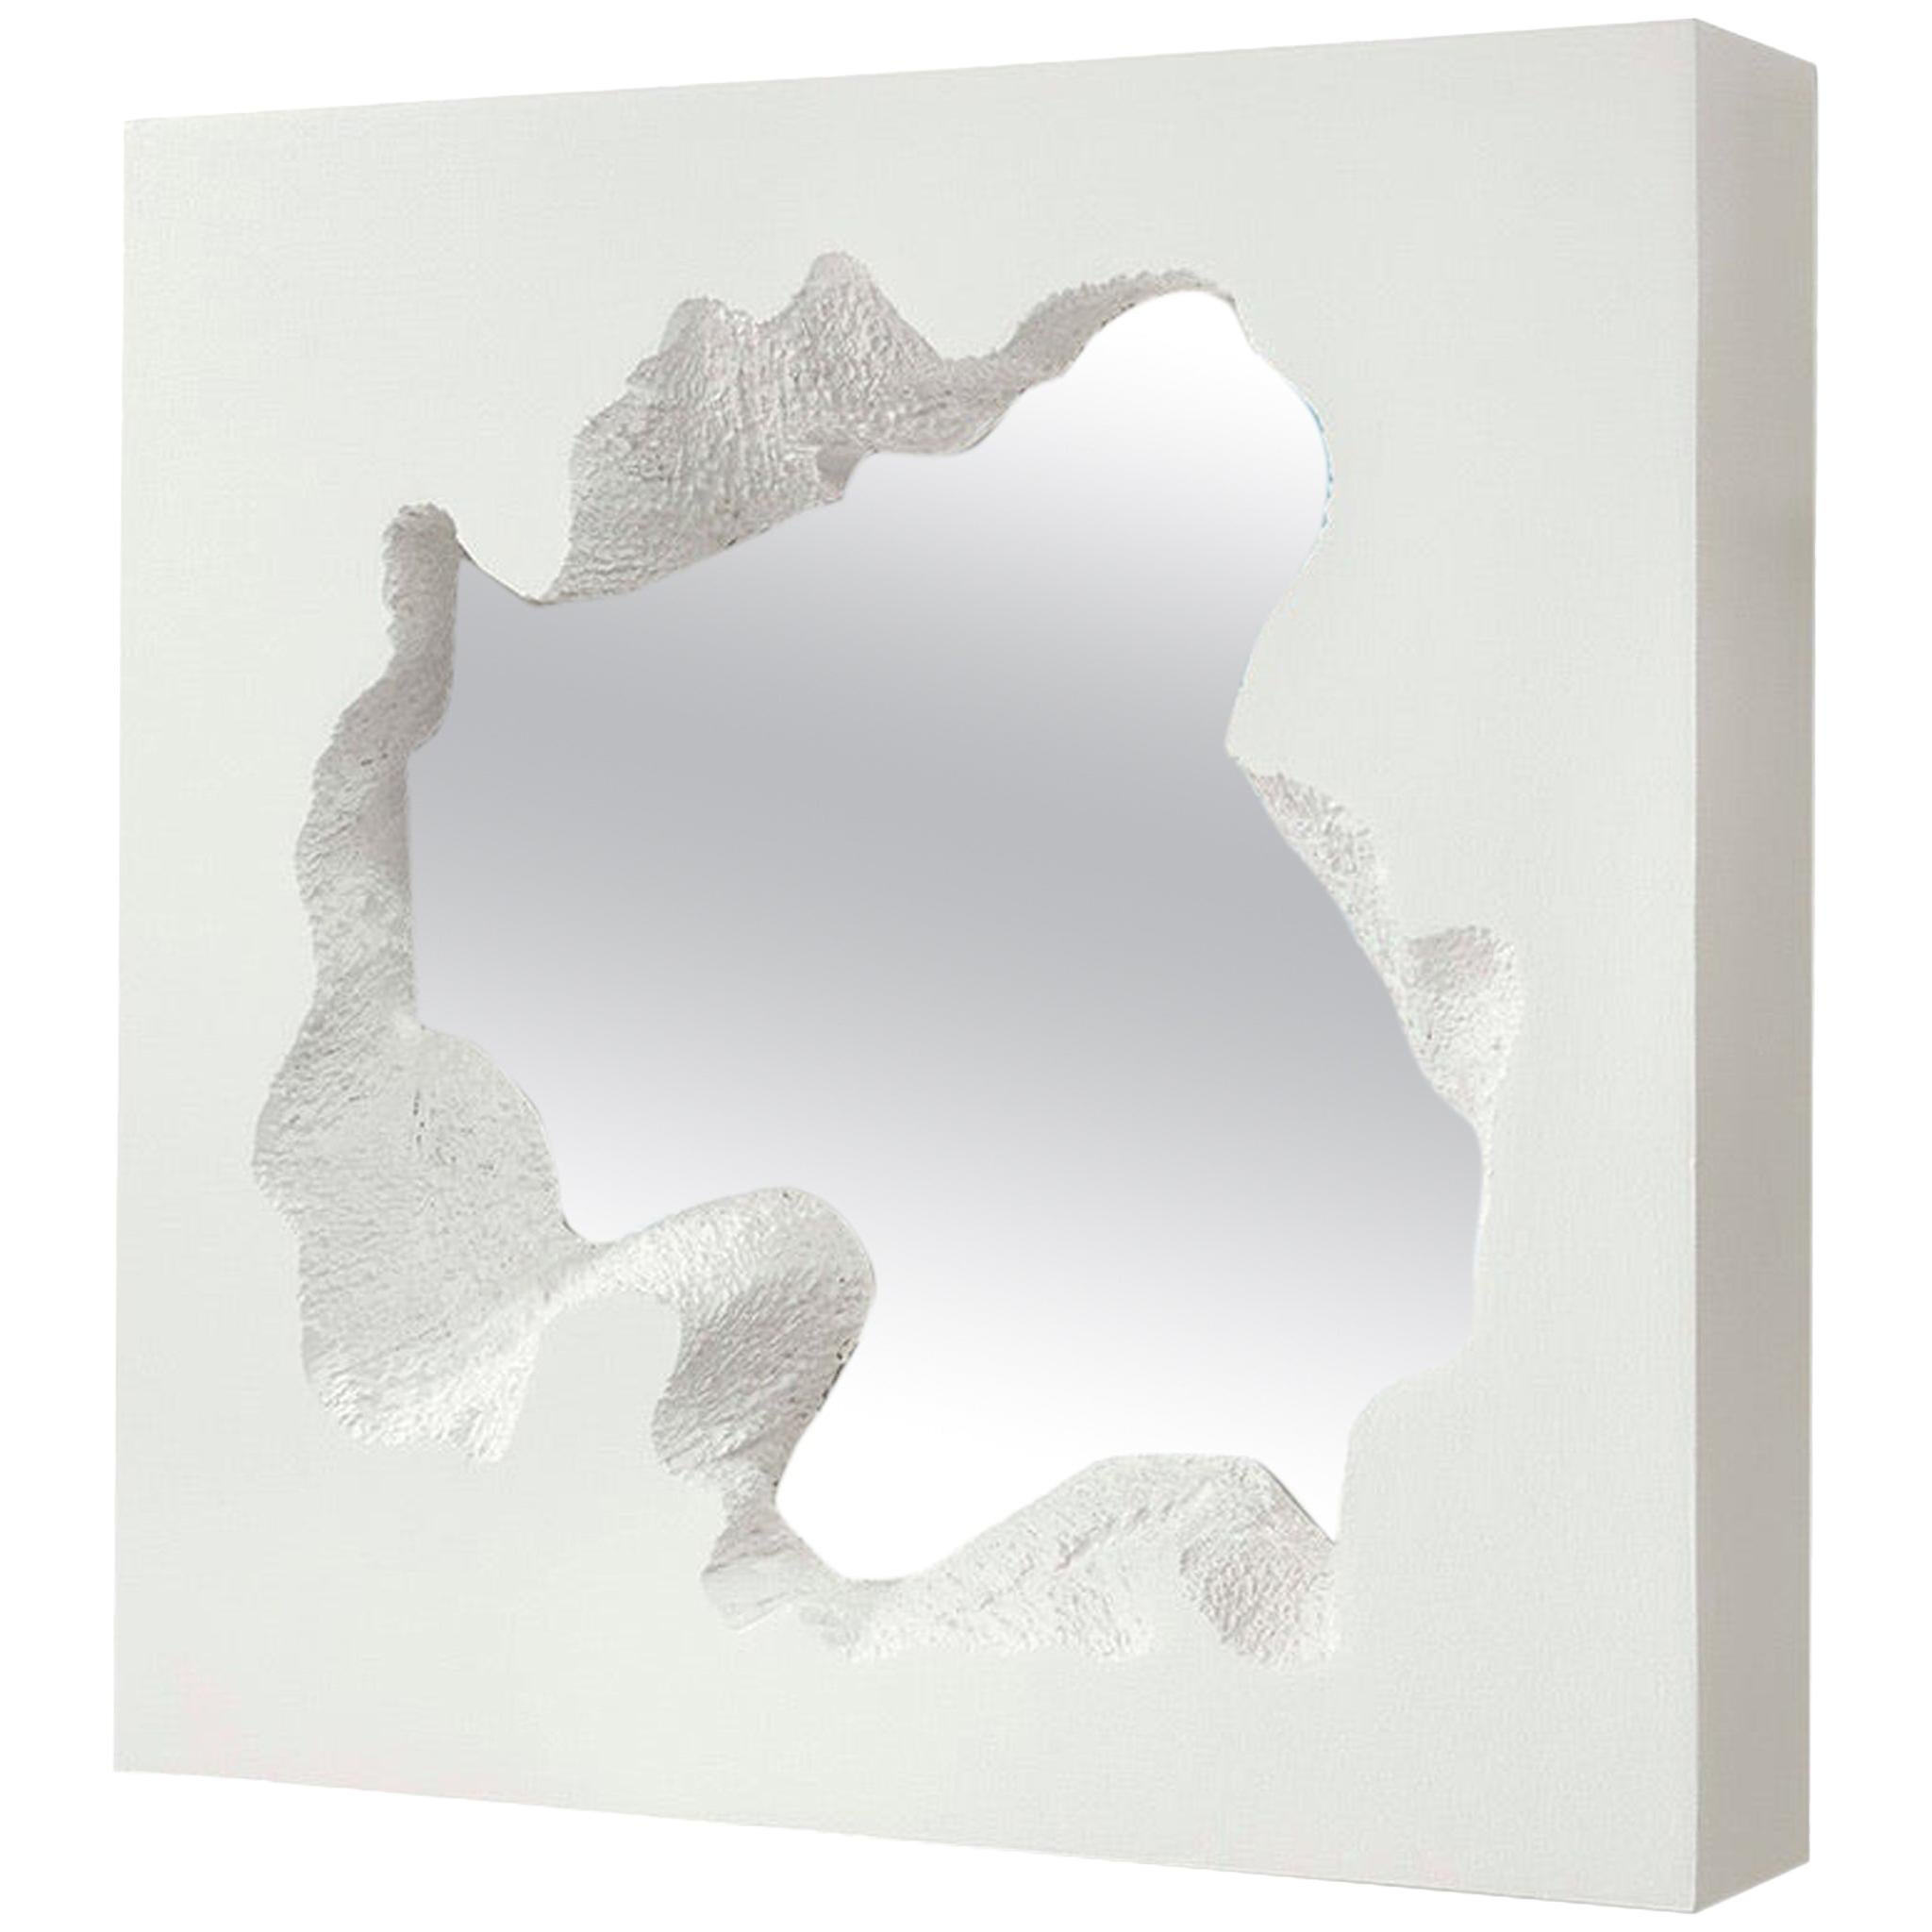 Gufram Broken Square Mirror White by Snarkitecture, Limited Edition of 77 For Sale